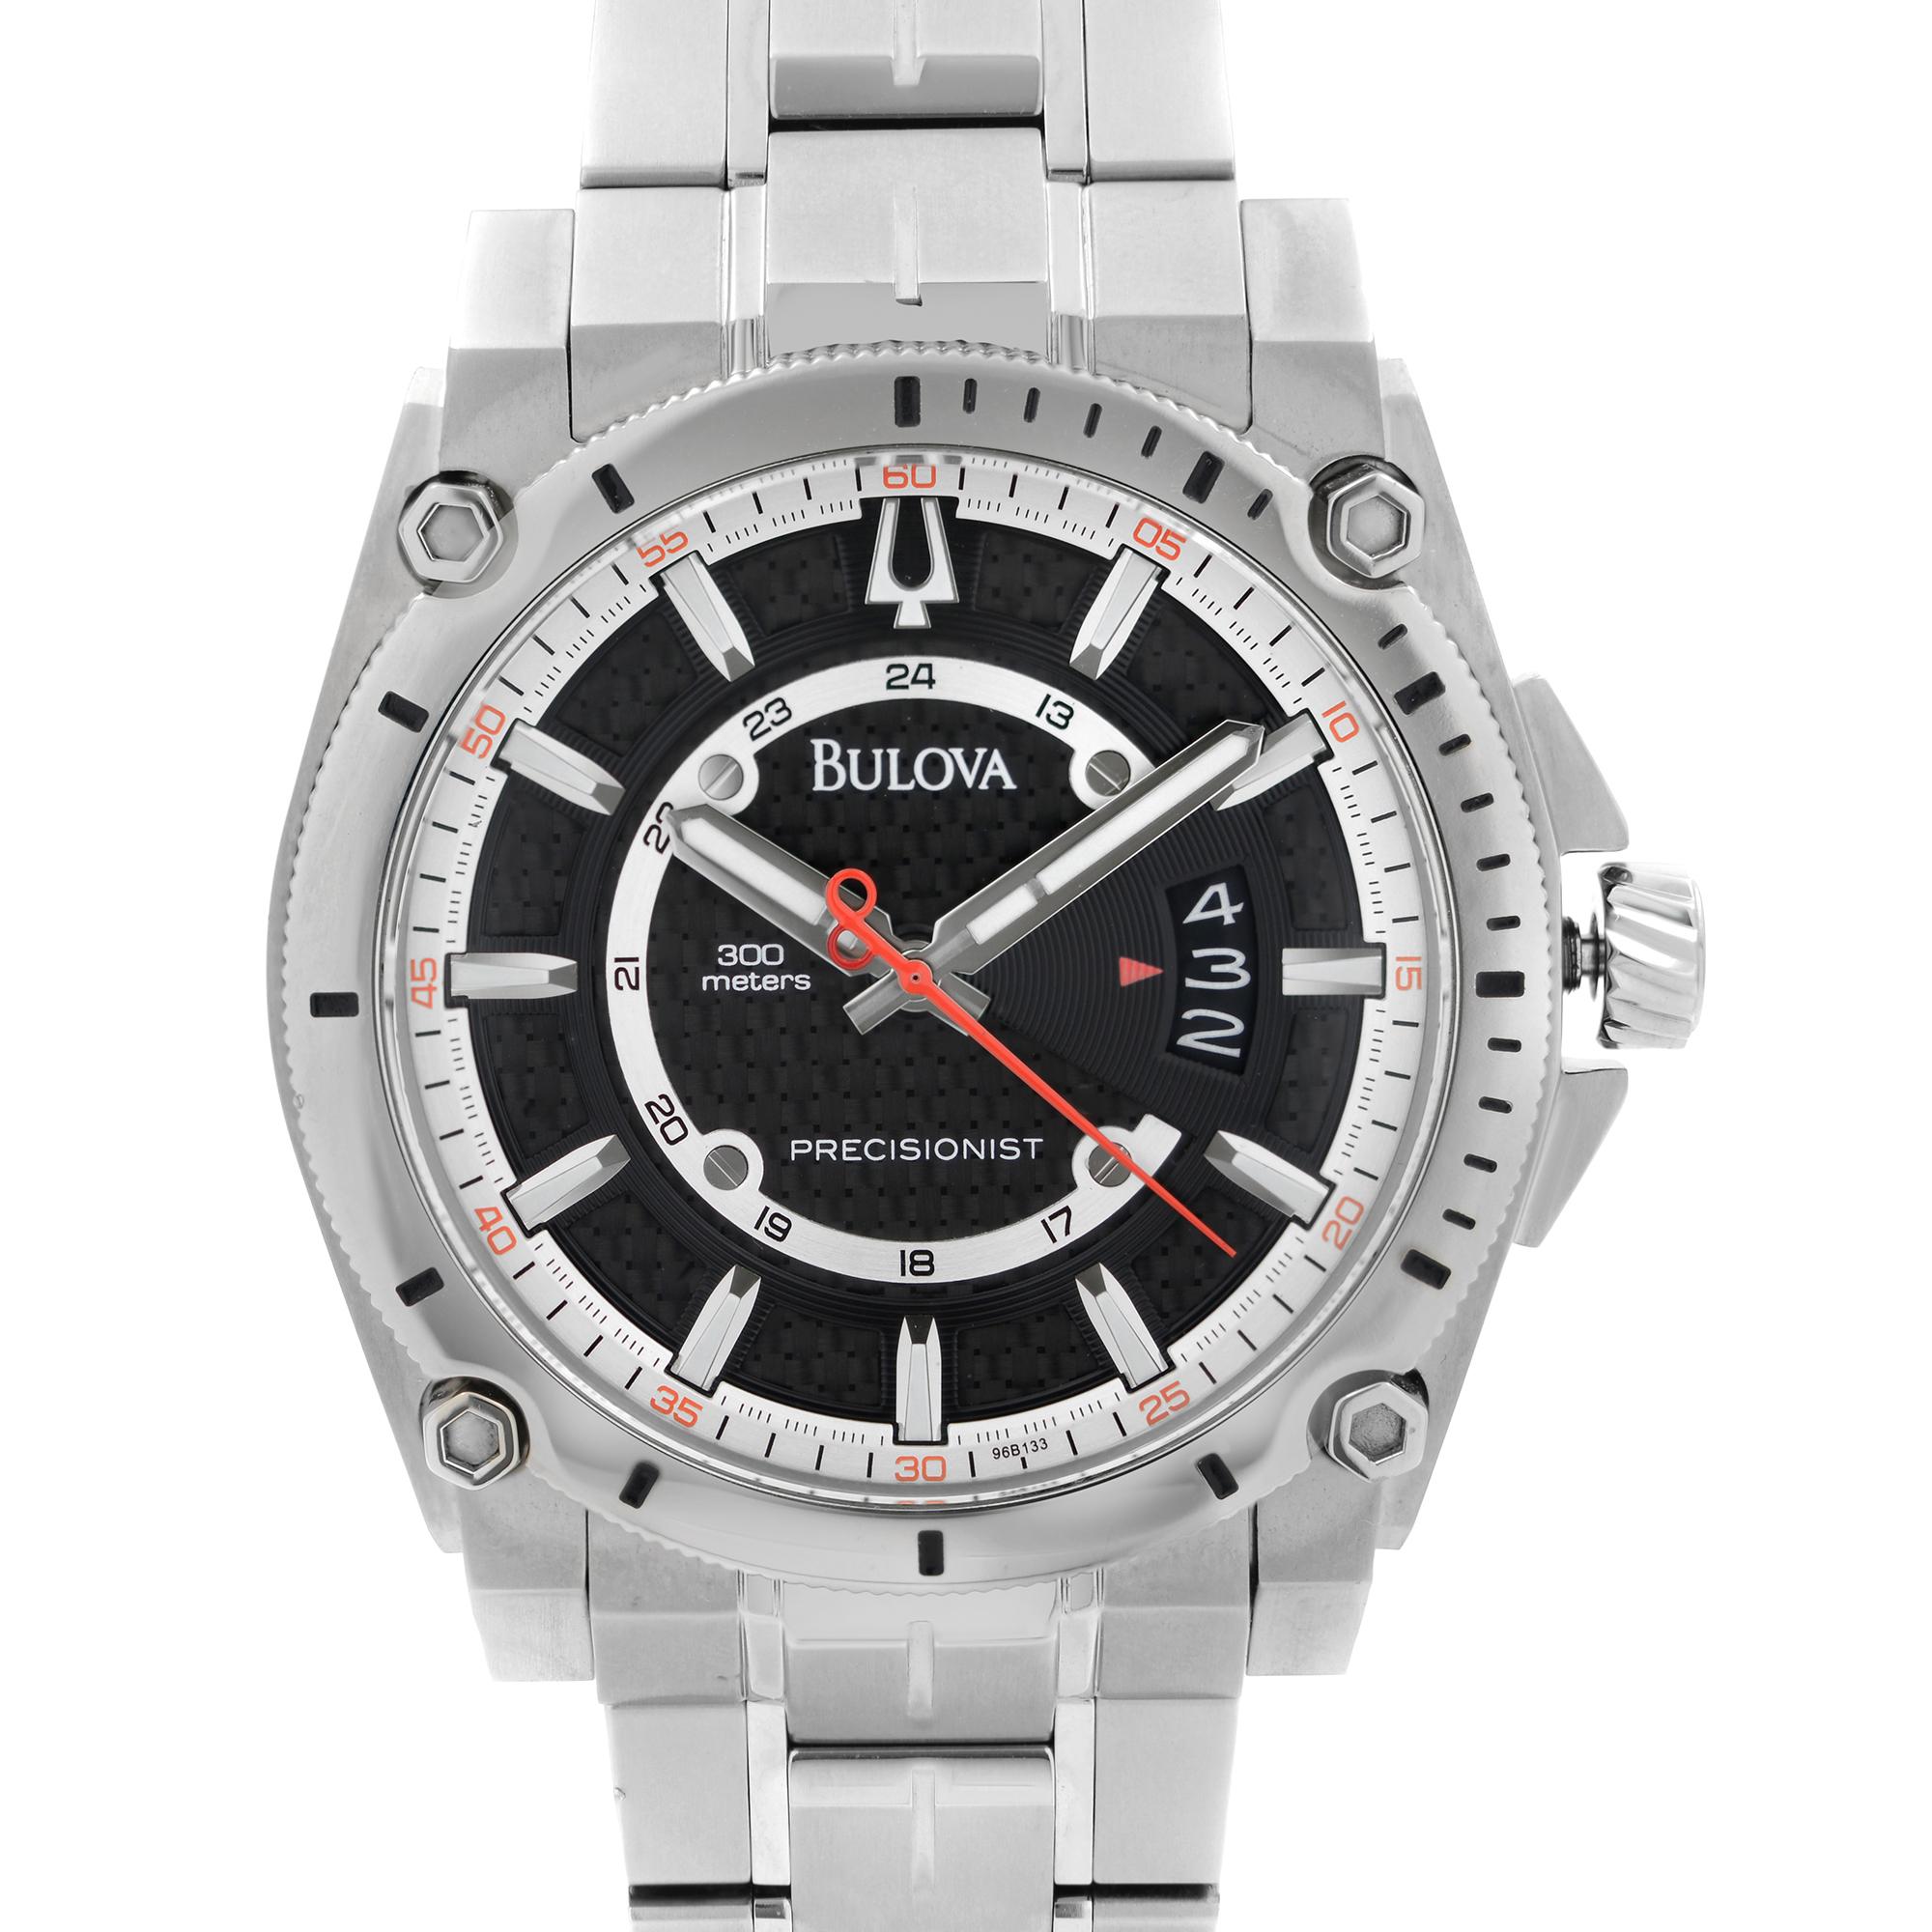 Unworn Bulova Precisionist 96B133. This Beautiful Timepiece is Powered by Quartz (Battery) Movement And Features: Round Titanium Case with a Titanium Bracelet. Fixed Stainless Steel bezel. Black Dial with Luminous Silver-Tone Hands and Index Hour